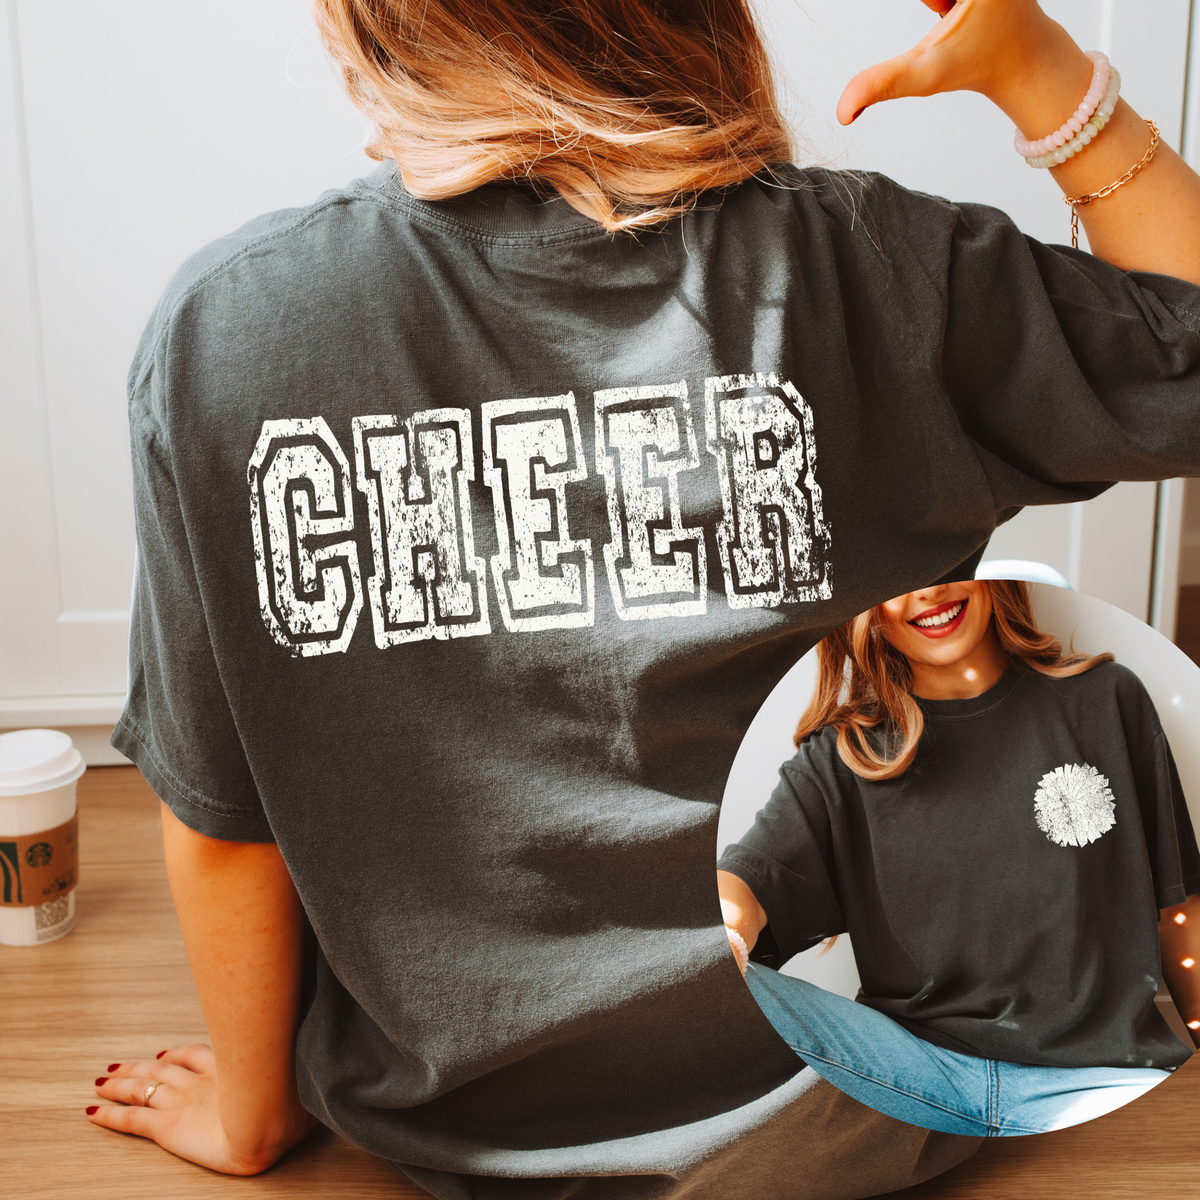 Cheer Varsity Distressed Bundle Word & PomPom Included in White Digital Design, PNG